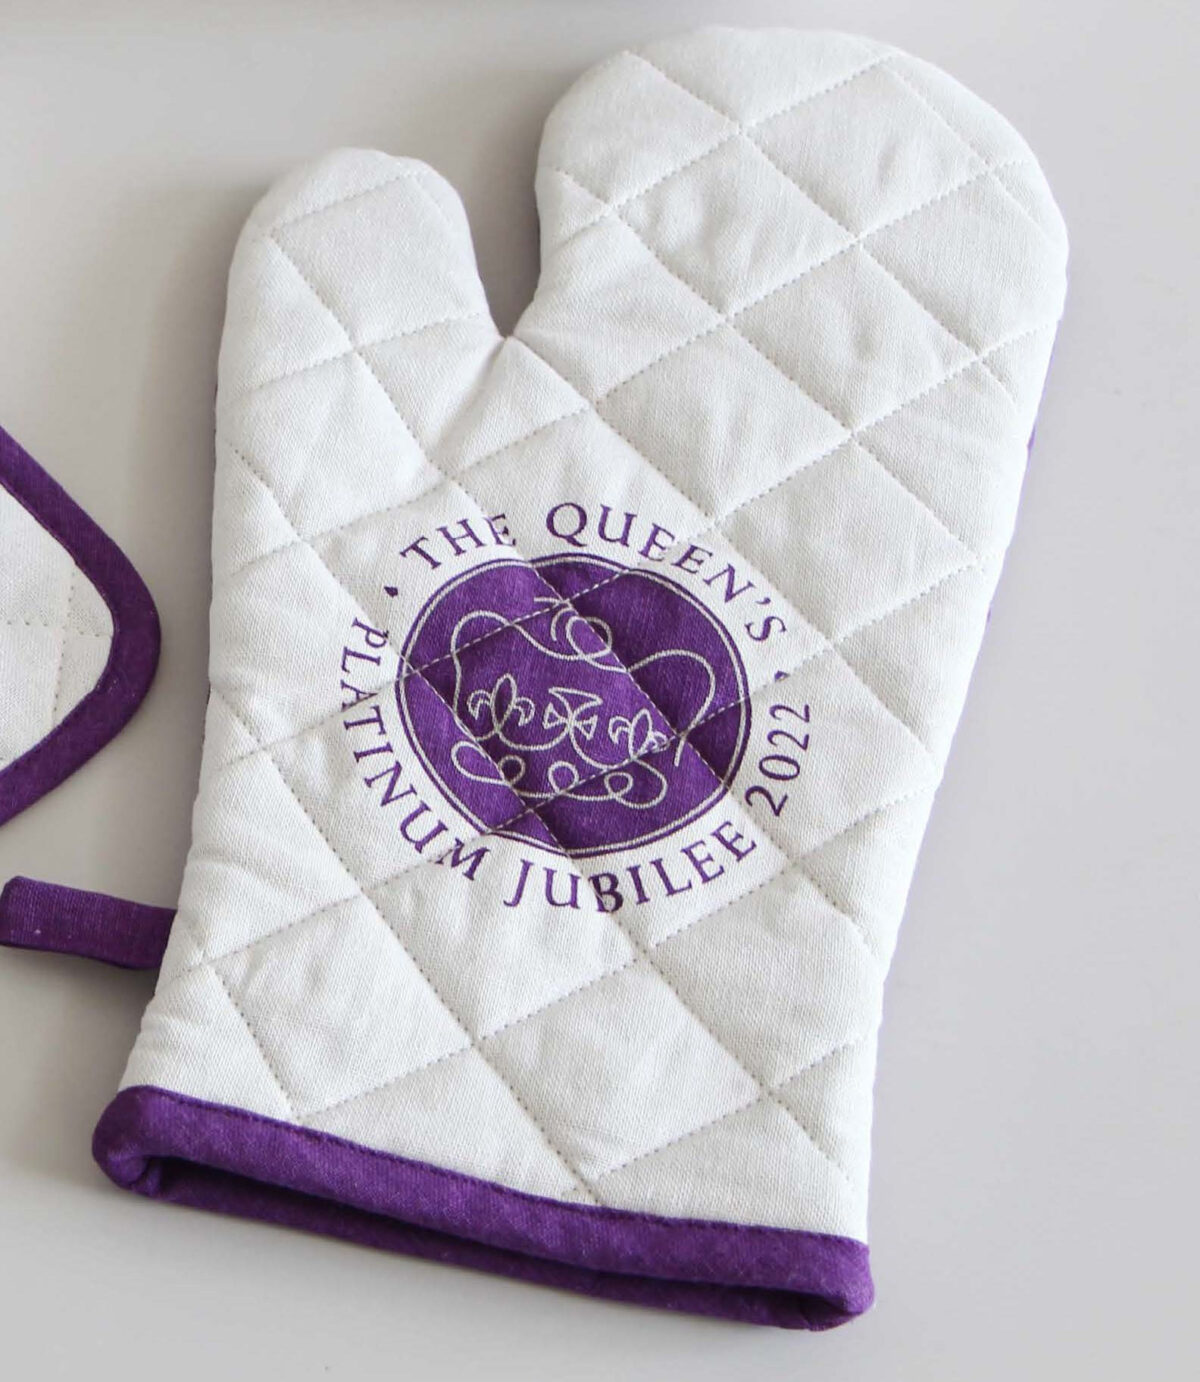 Jubilee-Oven-Mitt-Pack-of-two-Price-Cruncher